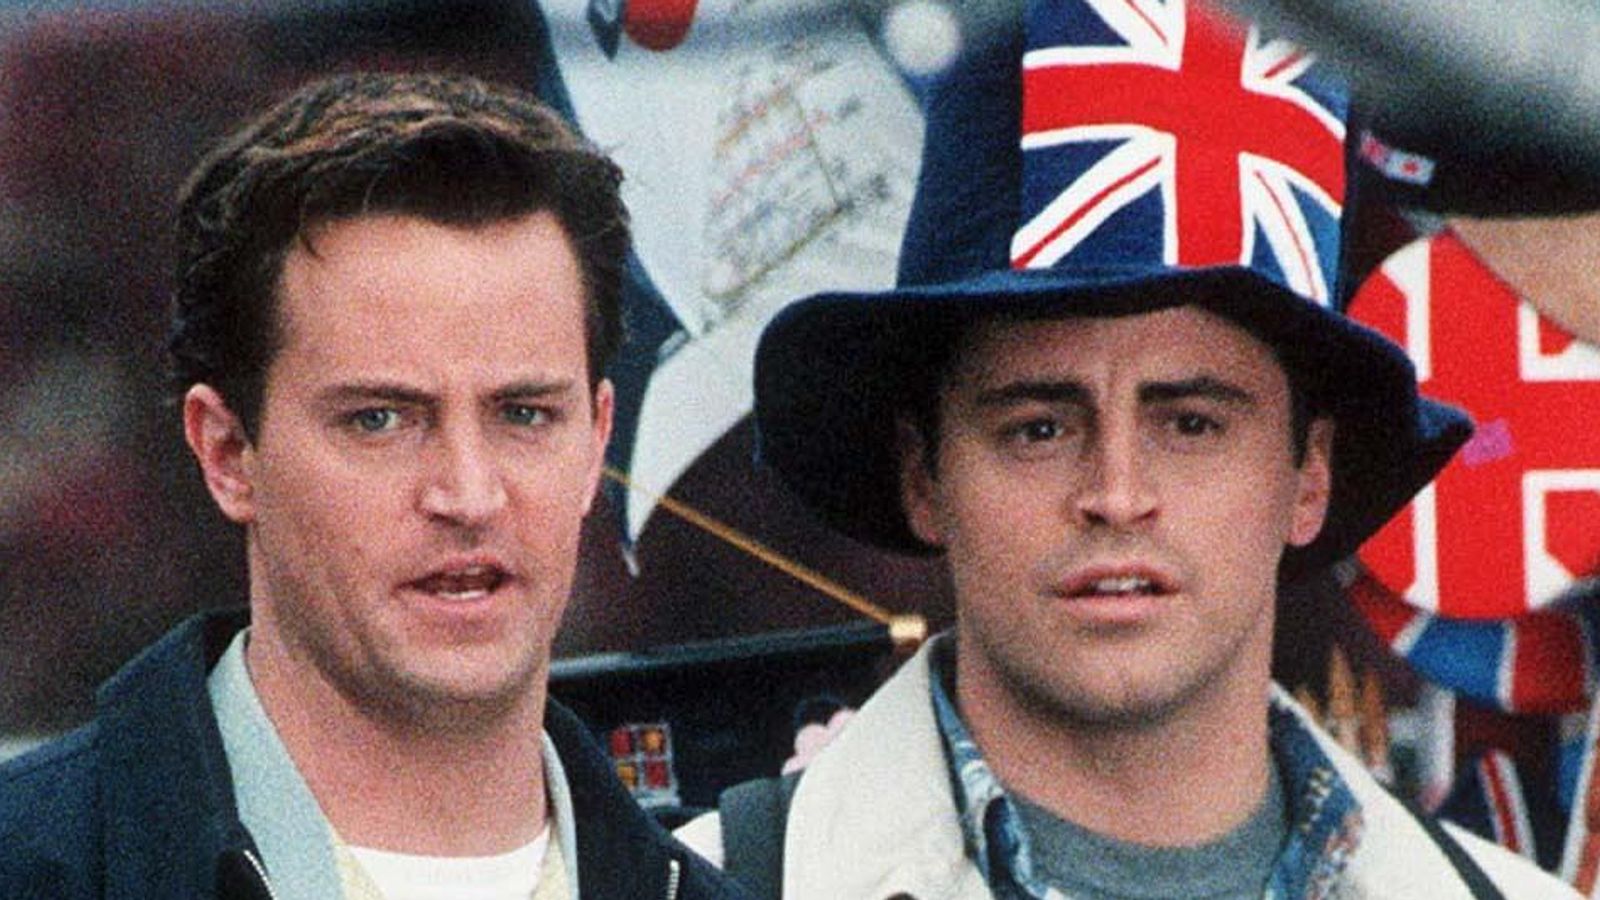 'I'll miss you every day': Courteney Cox and Matt LeBlanc pay tribute to Friends co-star Matthew Perry